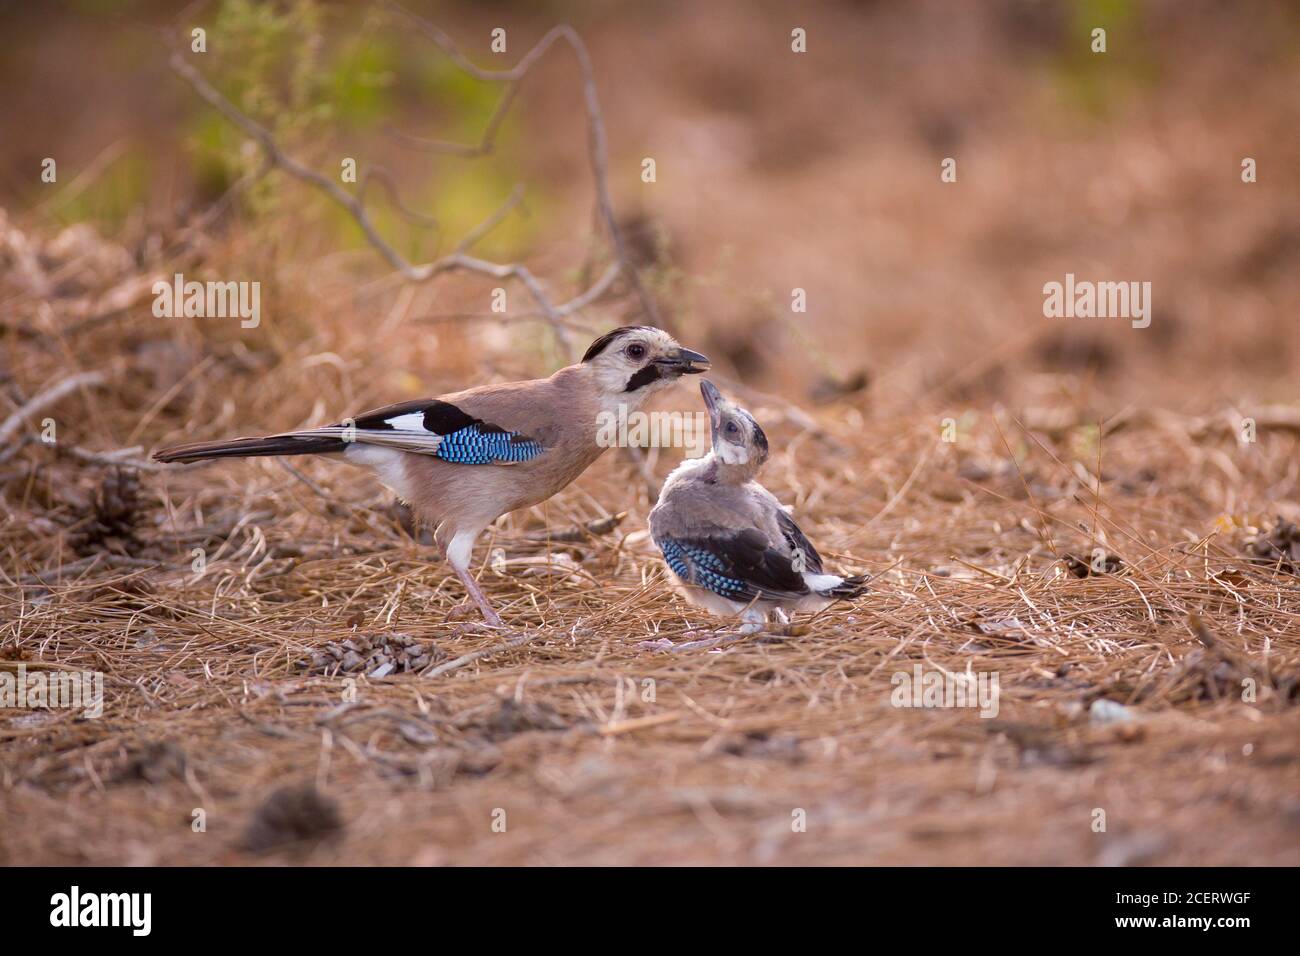 Eurasian jay (Garrulus glandarius) giving flight lessons to a Fledgling on the ground outside of the nest. Photographed in Israel in May Stock Photo